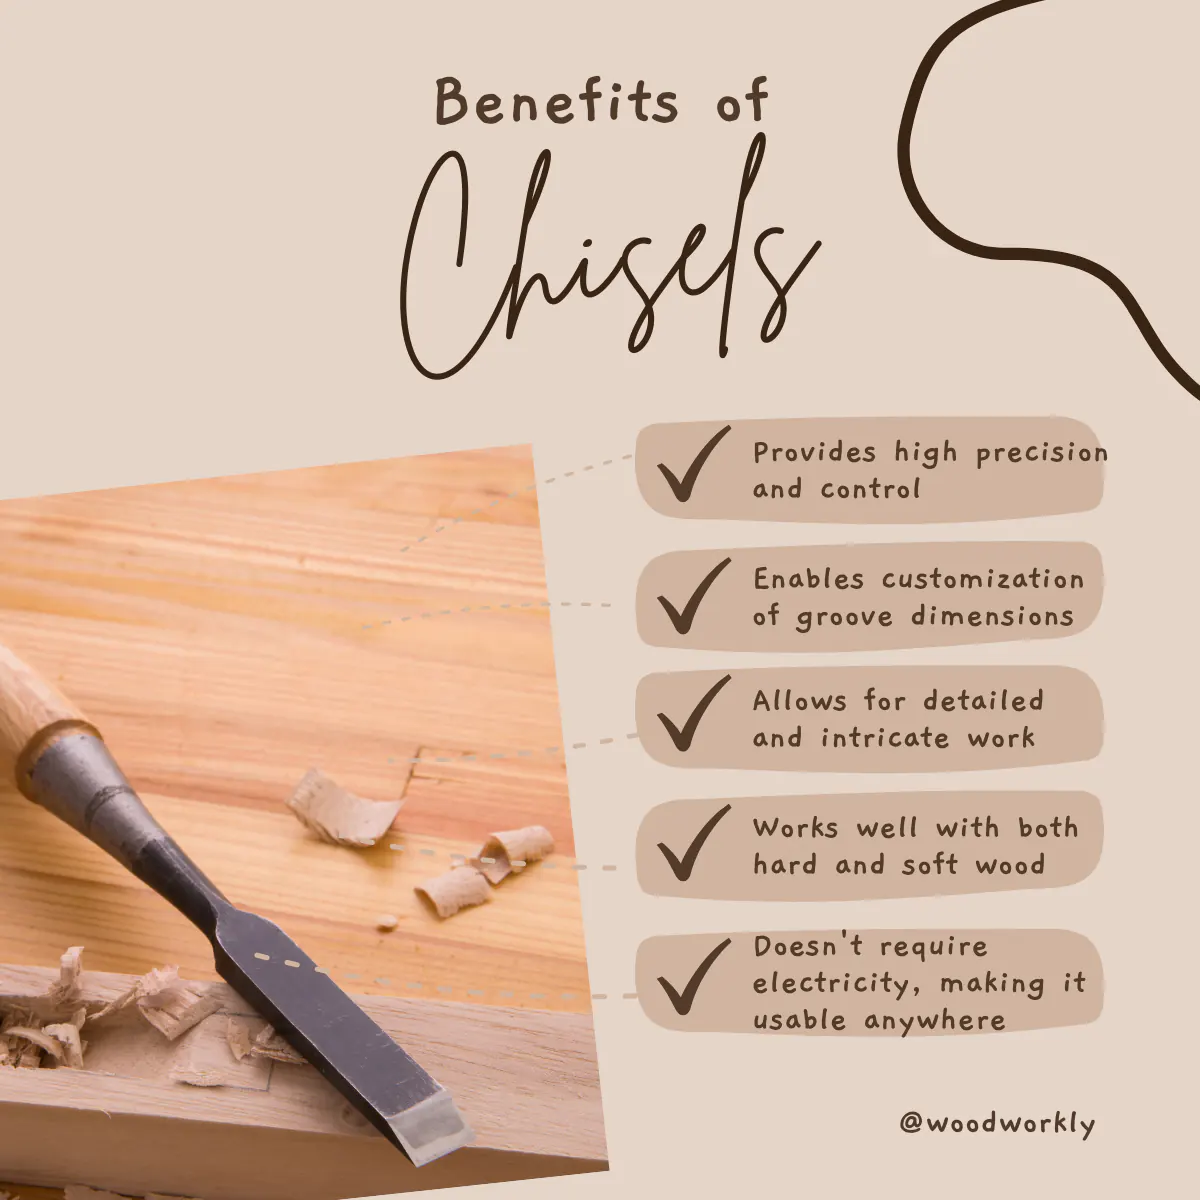 Benefits of using chisel to cut grooves